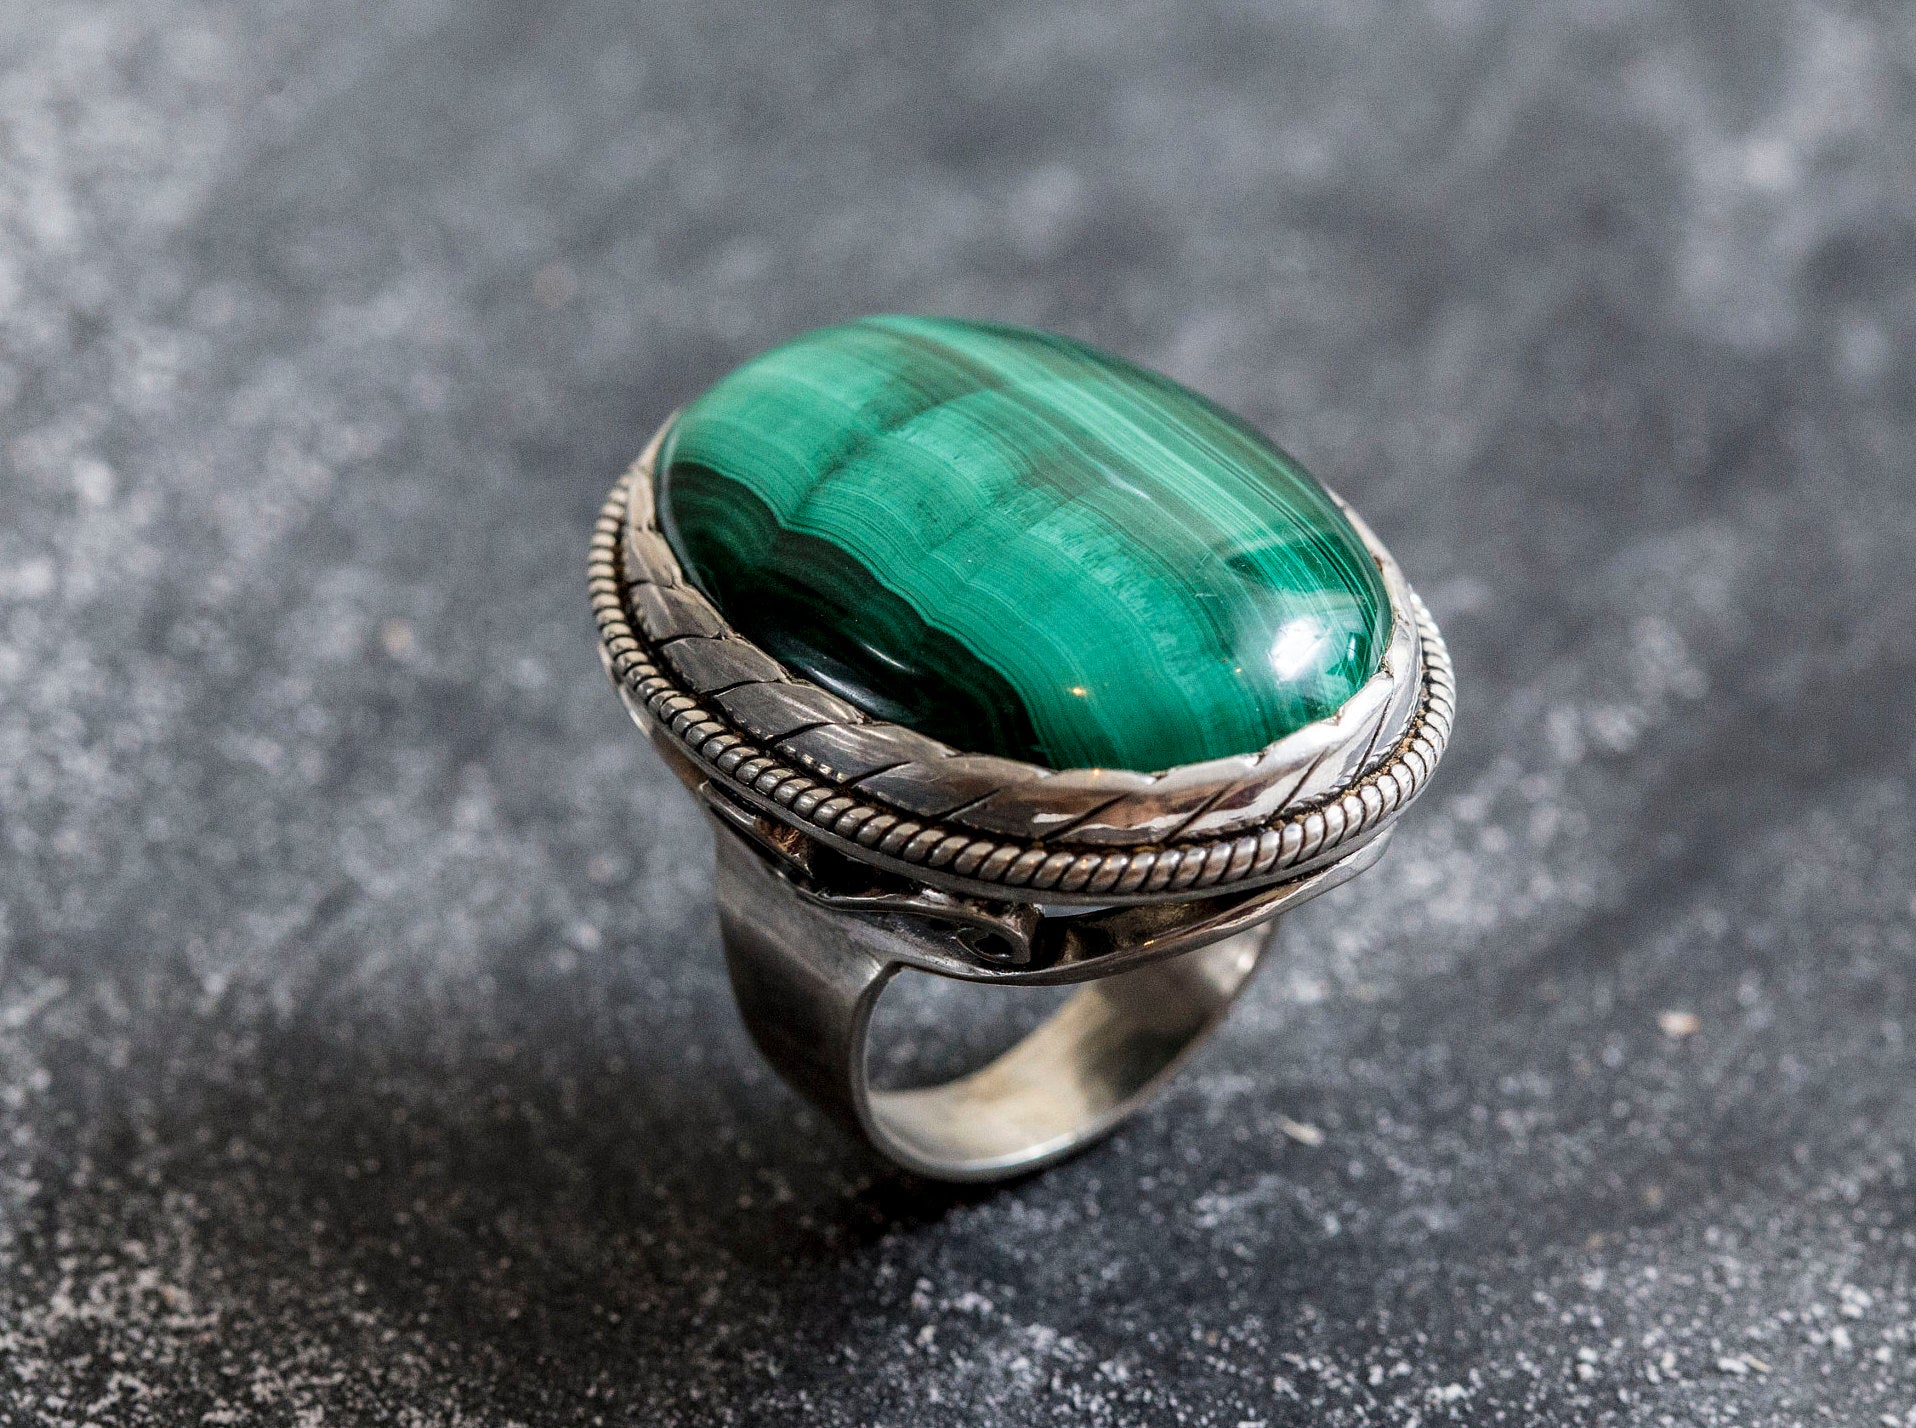 Very Big Malachite Ring, Natural Malachite, Vintage Rings, Large Stone, Natural Stone, Green Ring, Solid Silver, Antique Ring, Malachite